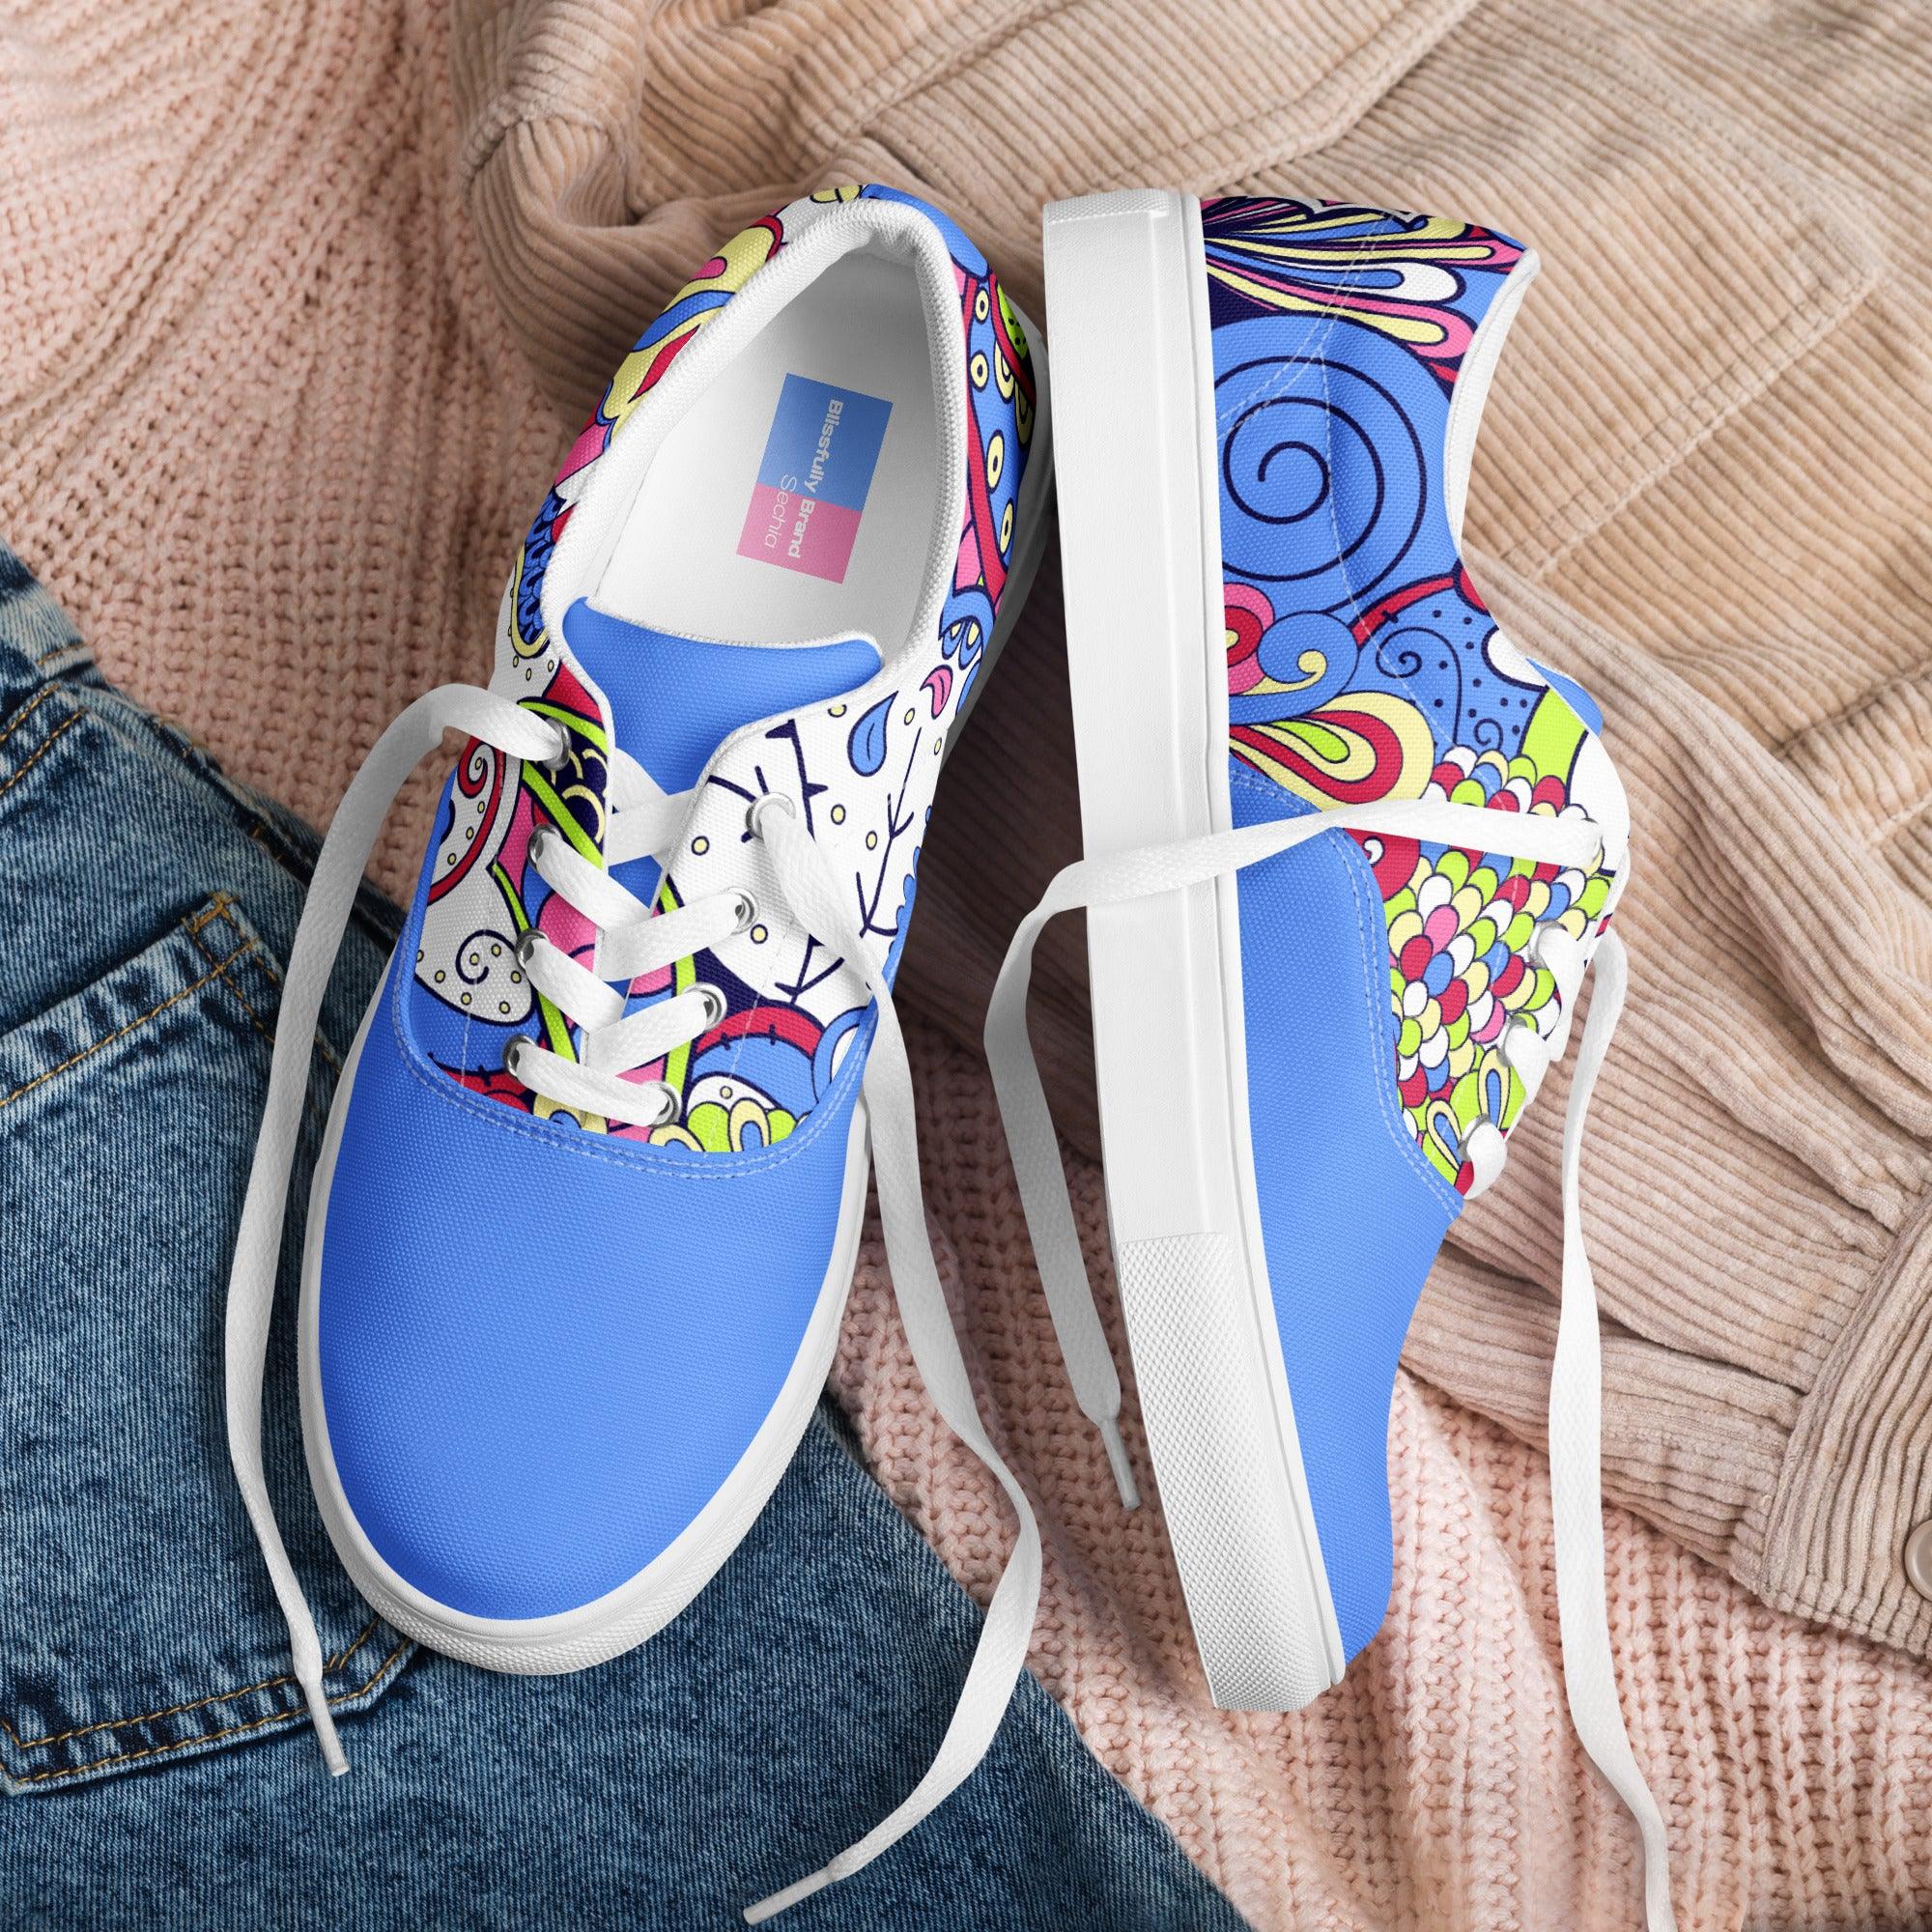 Sechia Pattern Mix Women's Canvas Sneakers - Abstract Paisley Solid Retro Chic Bold Vibrant Casual Hip Funky Psychedelic Flower Power Blue Pink